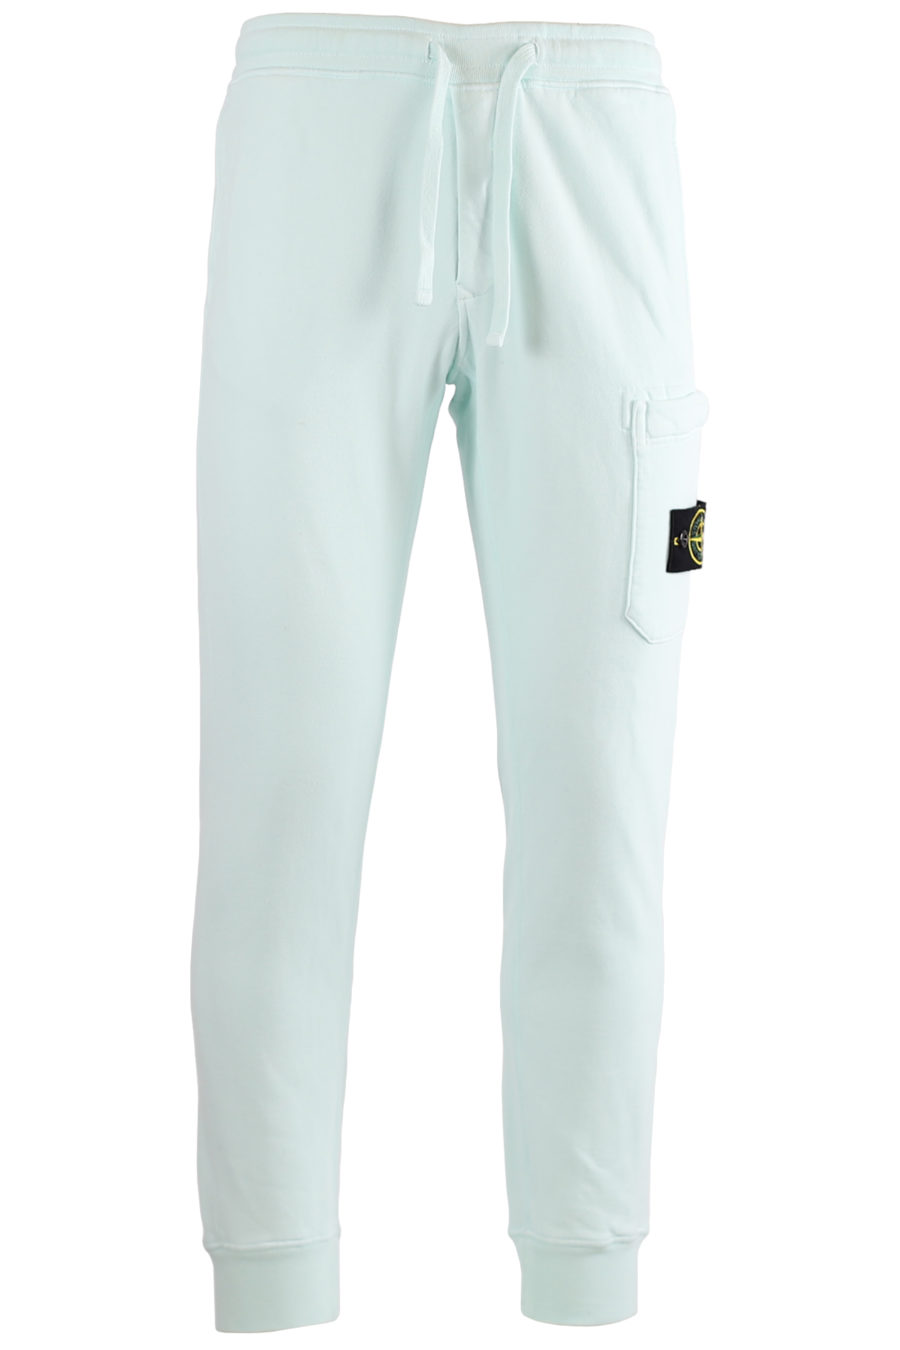 Tracksuit bottoms mint green with patch - IMG 7275